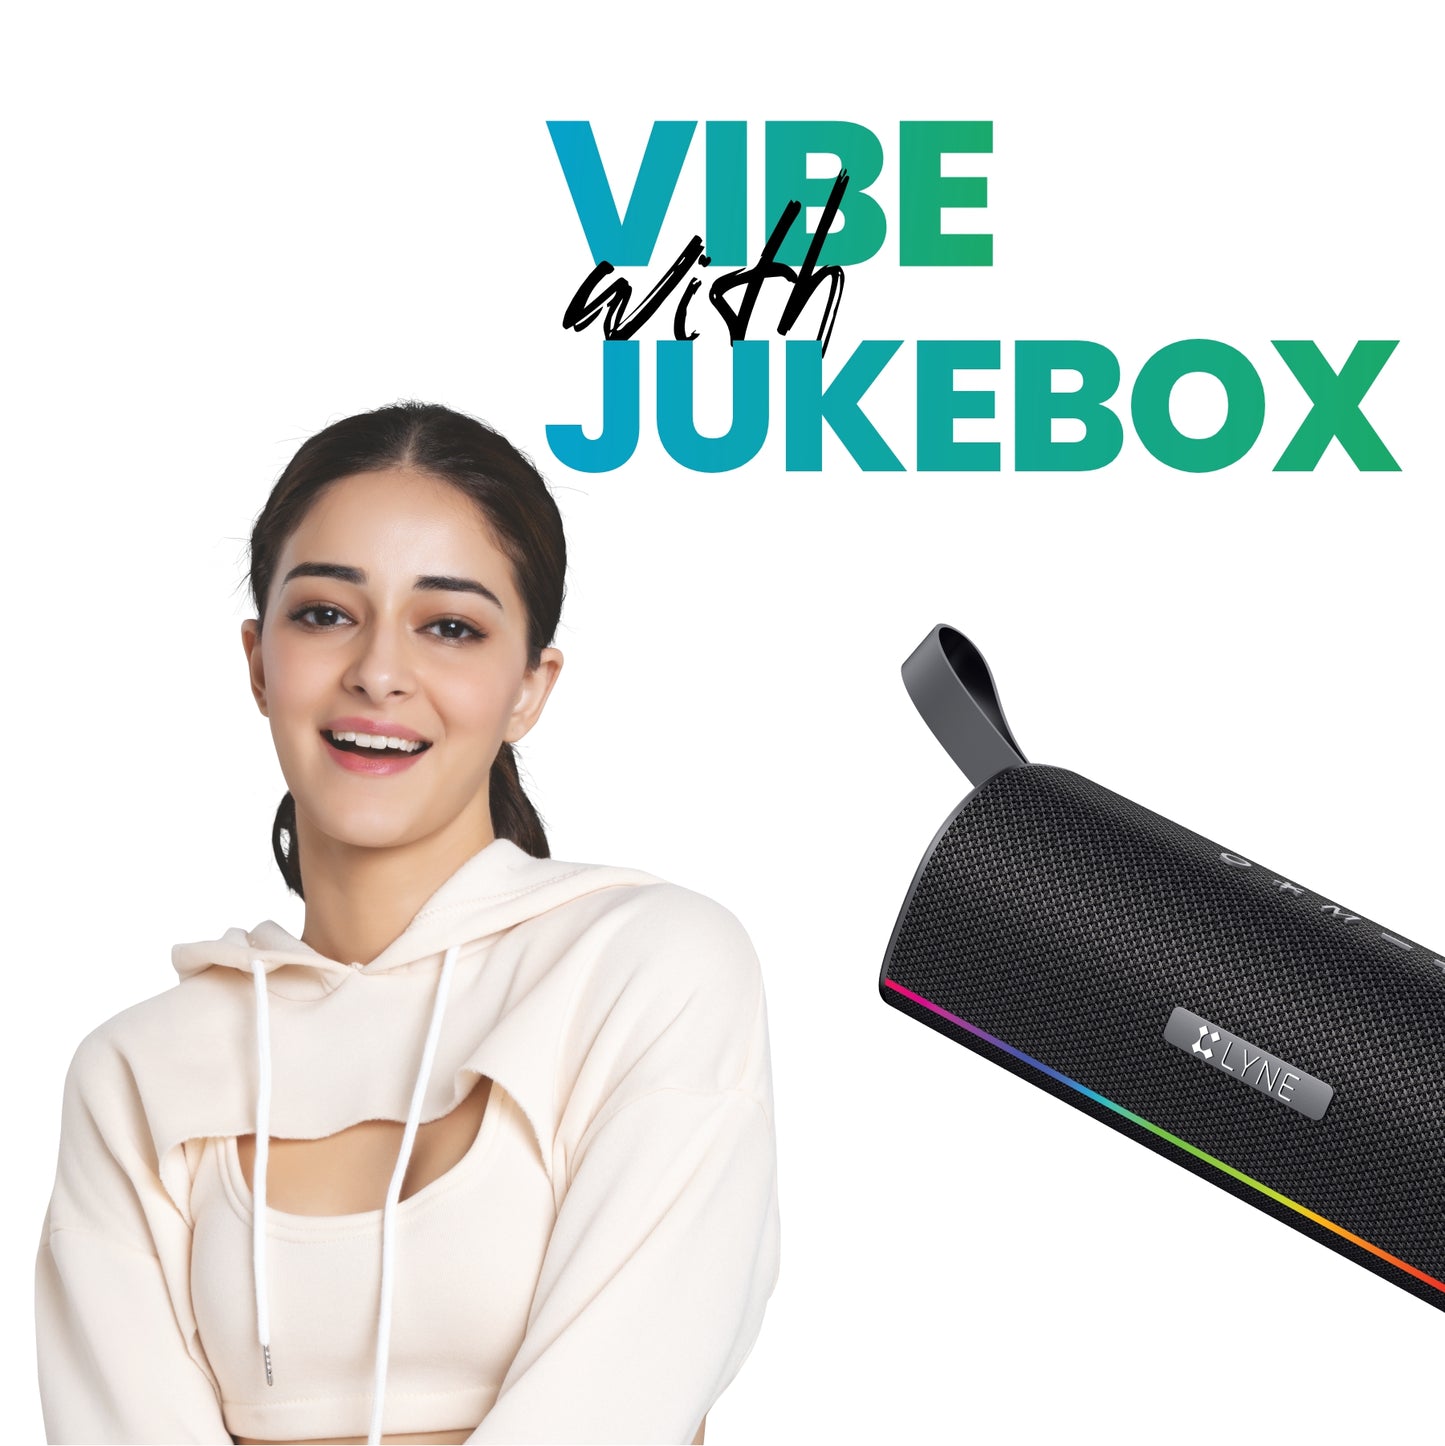 LYNE JukeBox 9 14W  Bluetooth Speaker with 10 Hours Music Time, IPX5 Water Resistance & TWS Function